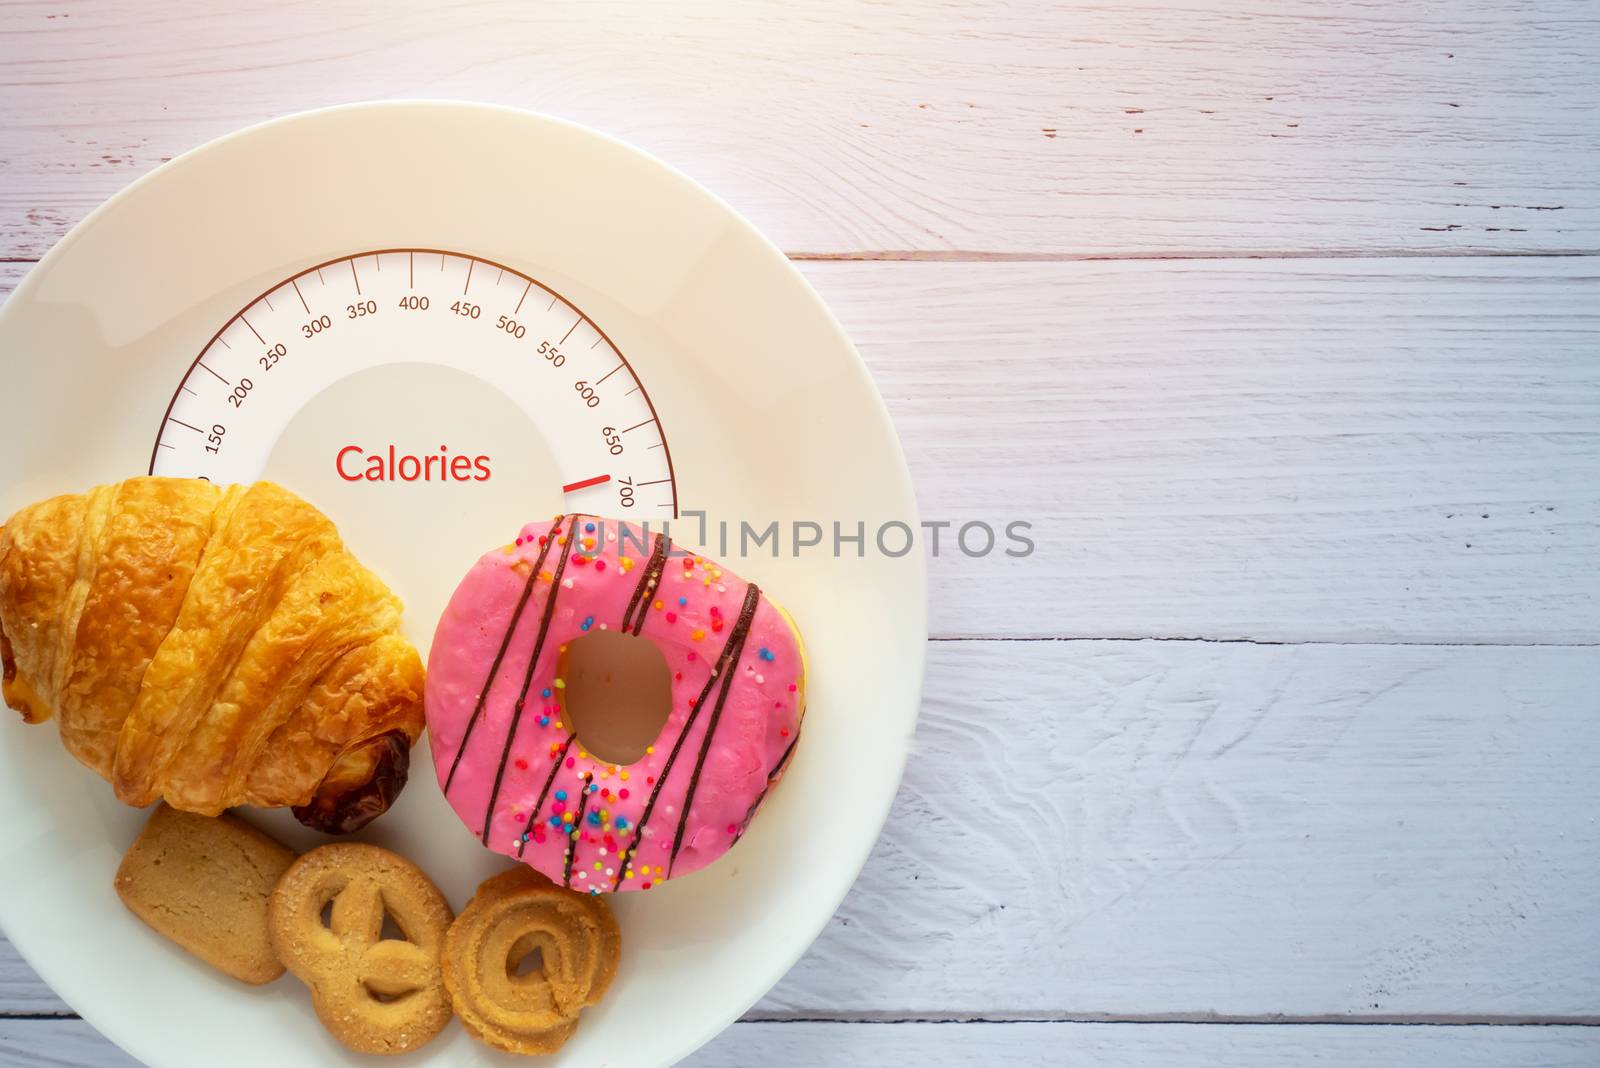 Calories counting and food control concept. doughnut ,croissant and cookies on white plate with tongue scales for Calories measuring